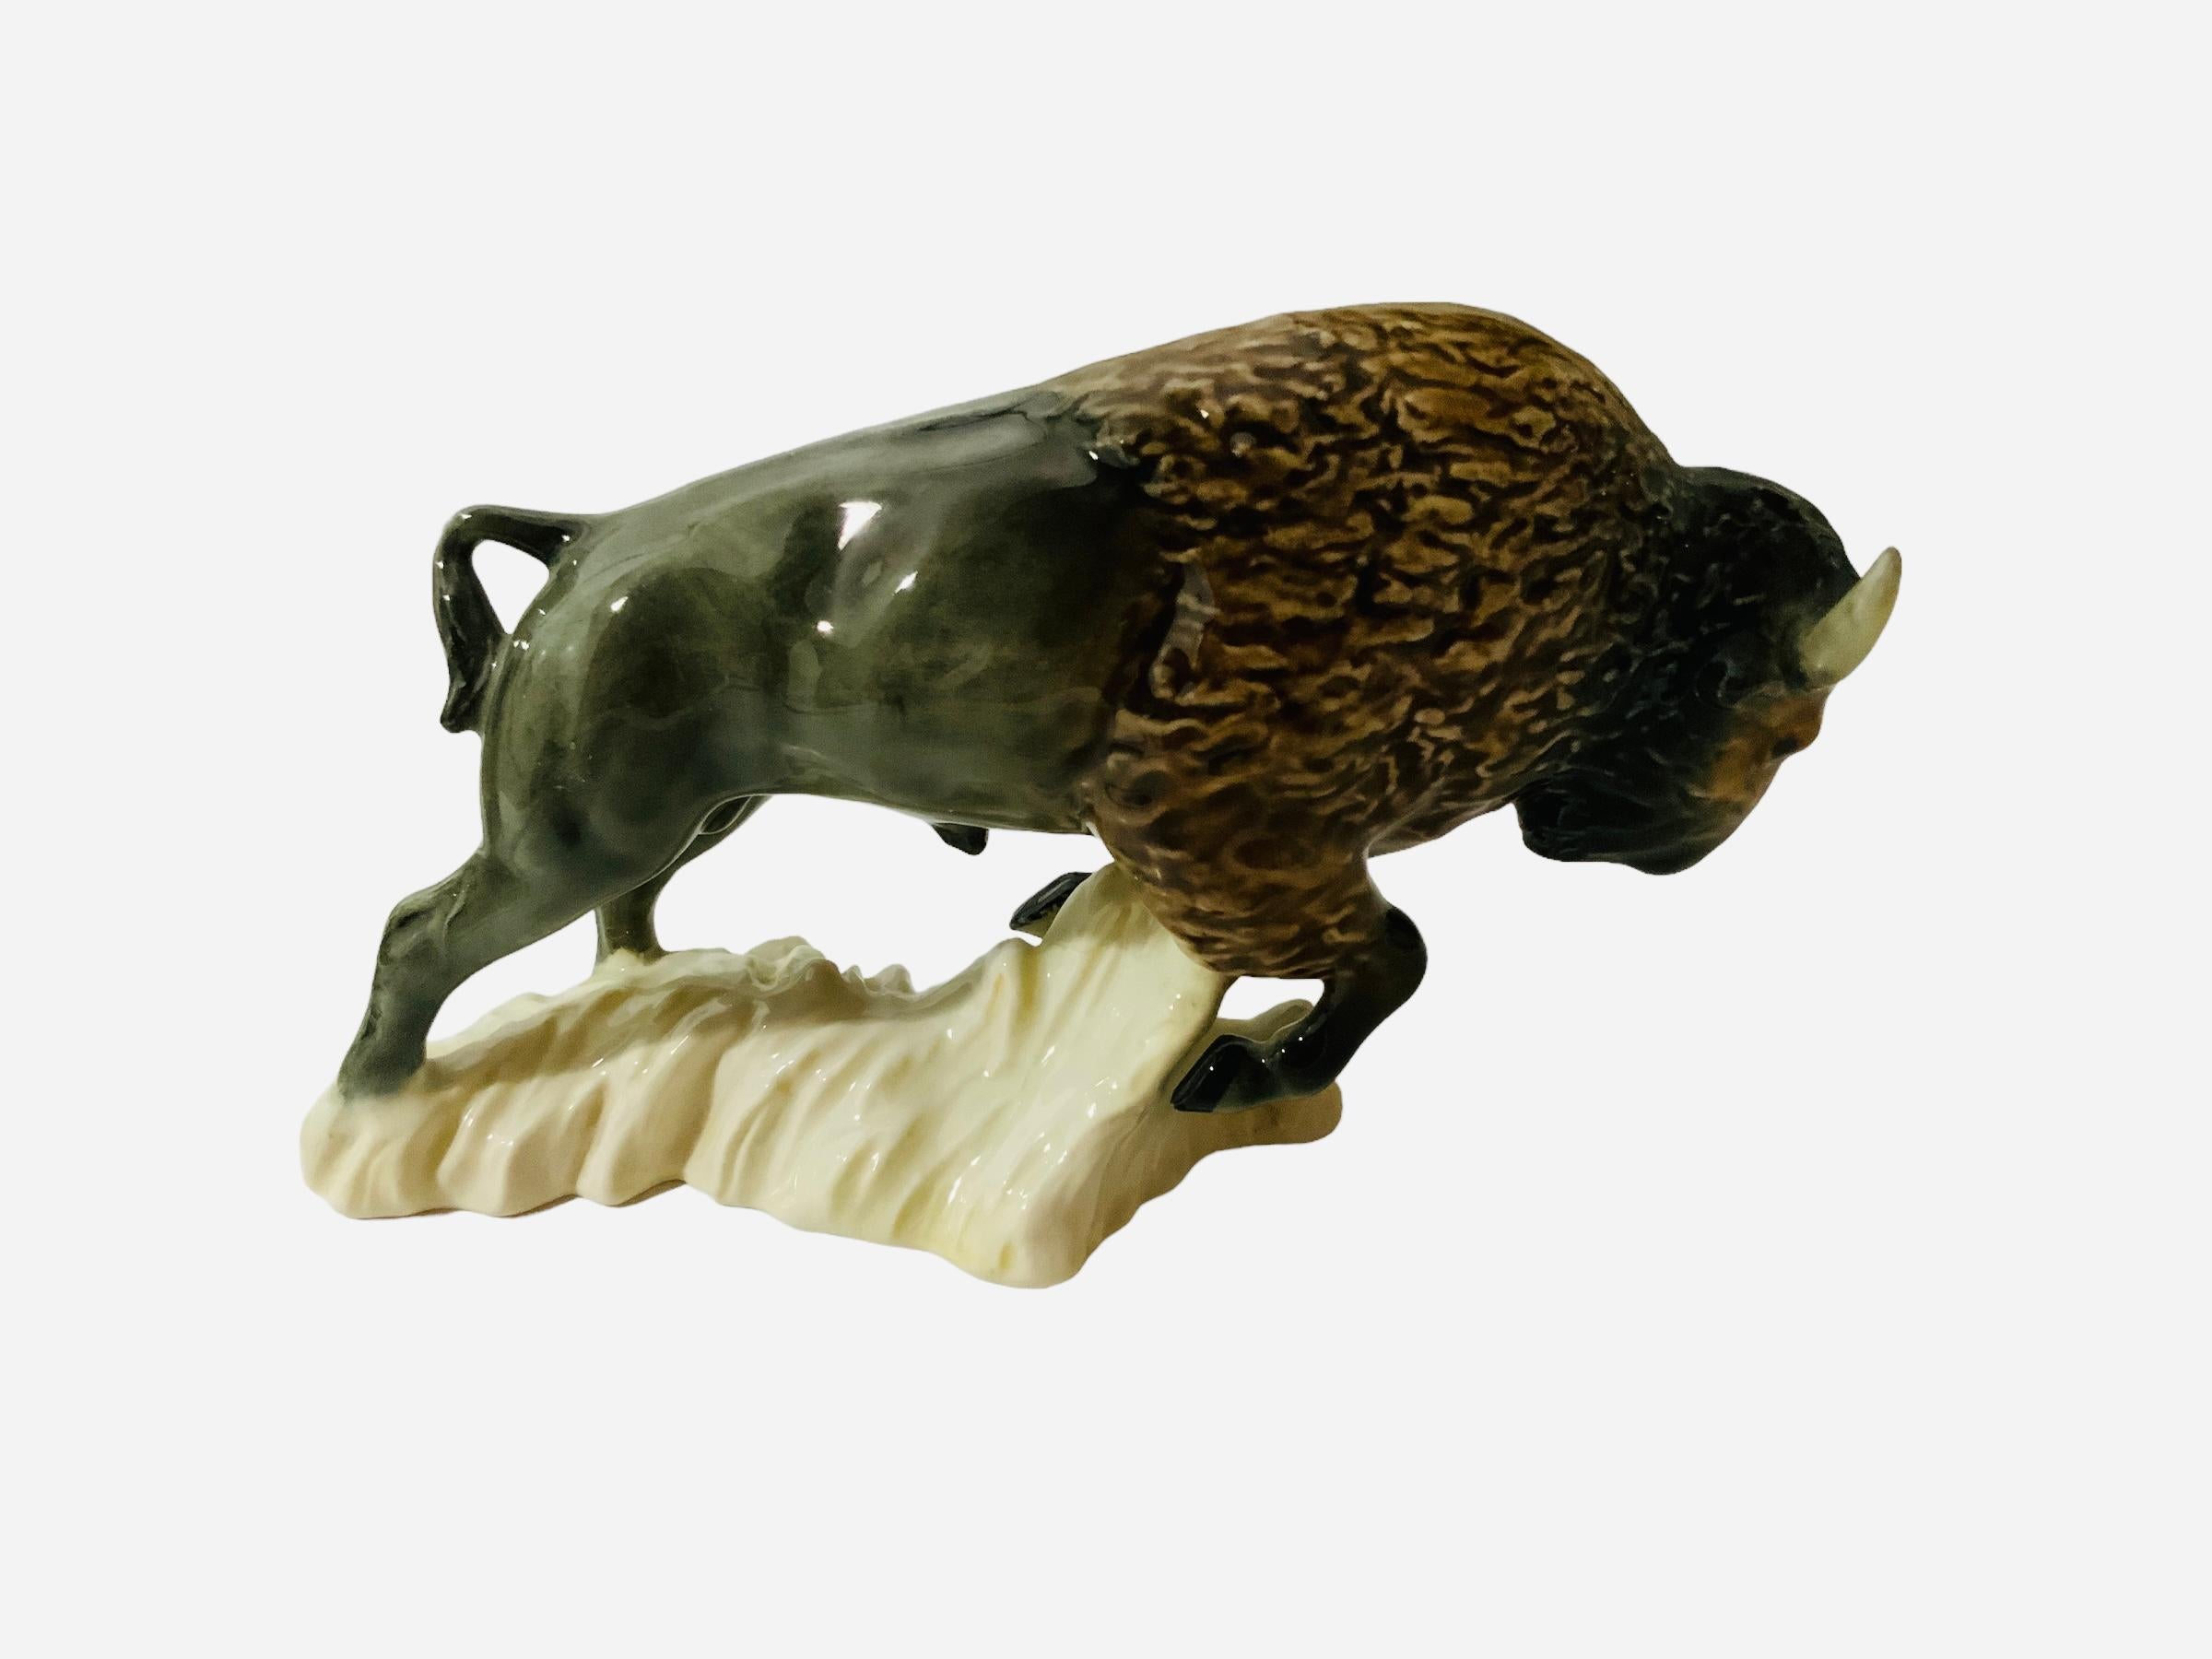 This is a Goeble porcelain figurine of a buffalo. It depicts a very well done hand painted brave and strong buffalo. He is plowing forward while it’s legs are lifting up soil. The American buffalo symbolizes abundance and manifestation. The Goeble